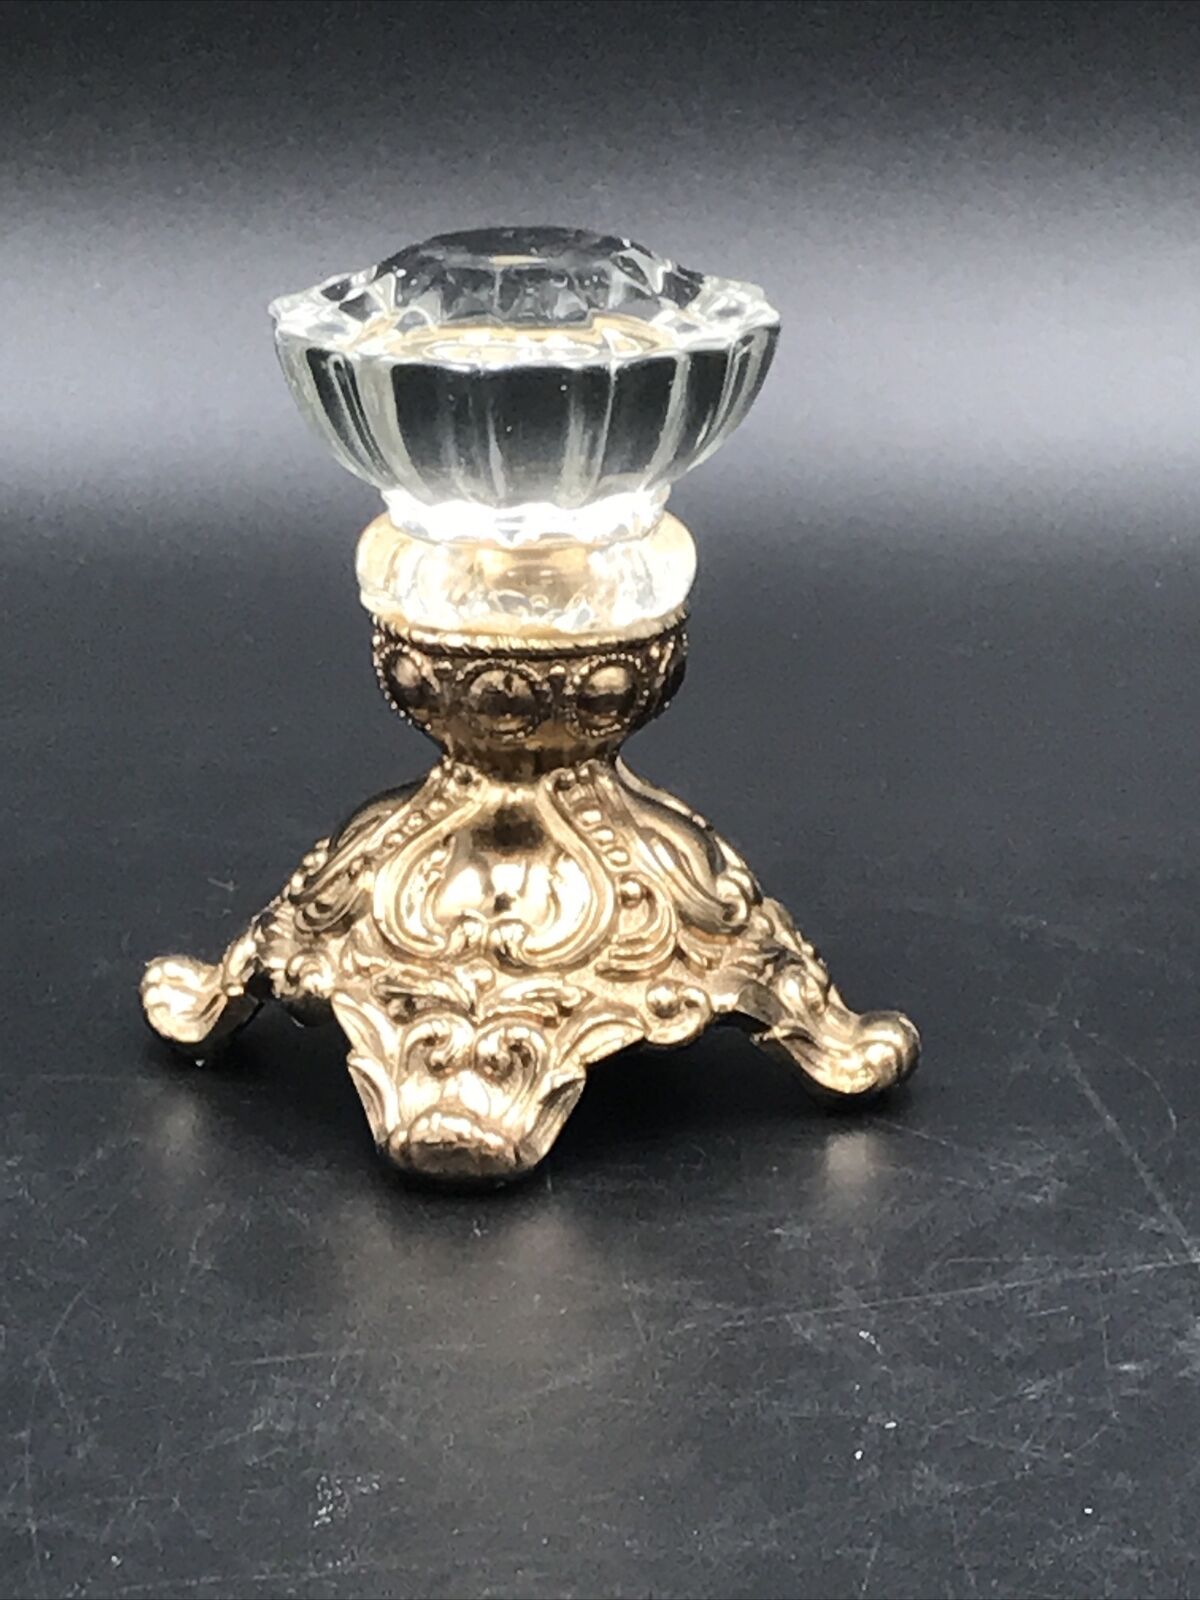 Vintage Round Crystal Knob W/ Brass Pedestal Unmarked.  SEE PICS FOR CLOSEUP.